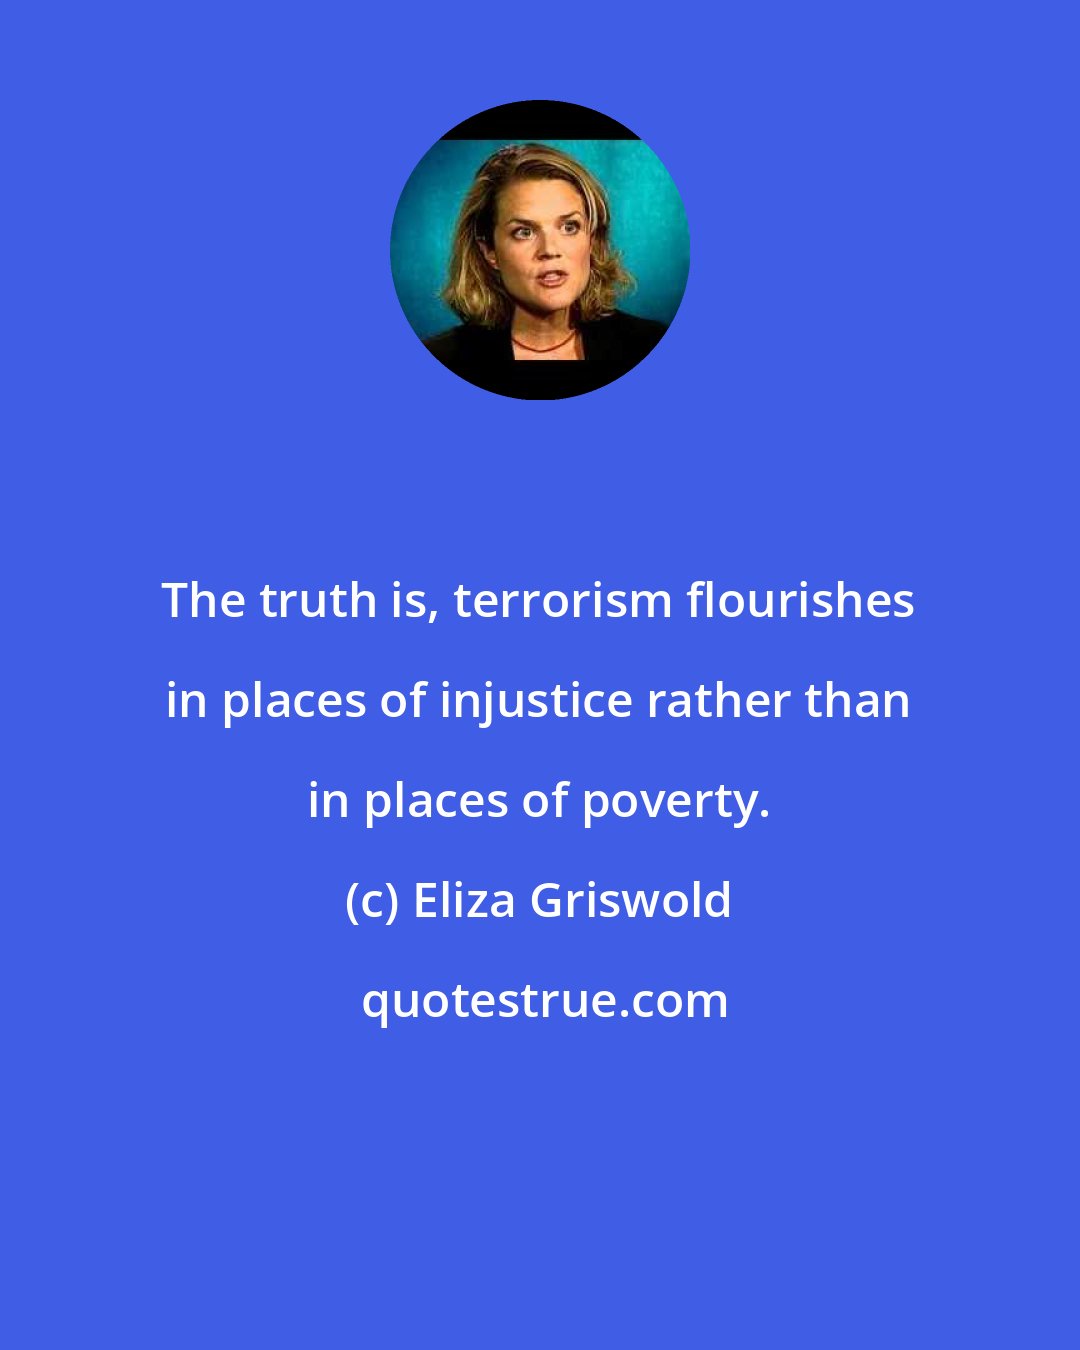 Eliza Griswold: The truth is, terrorism flourishes in places of injustice rather than in places of poverty.